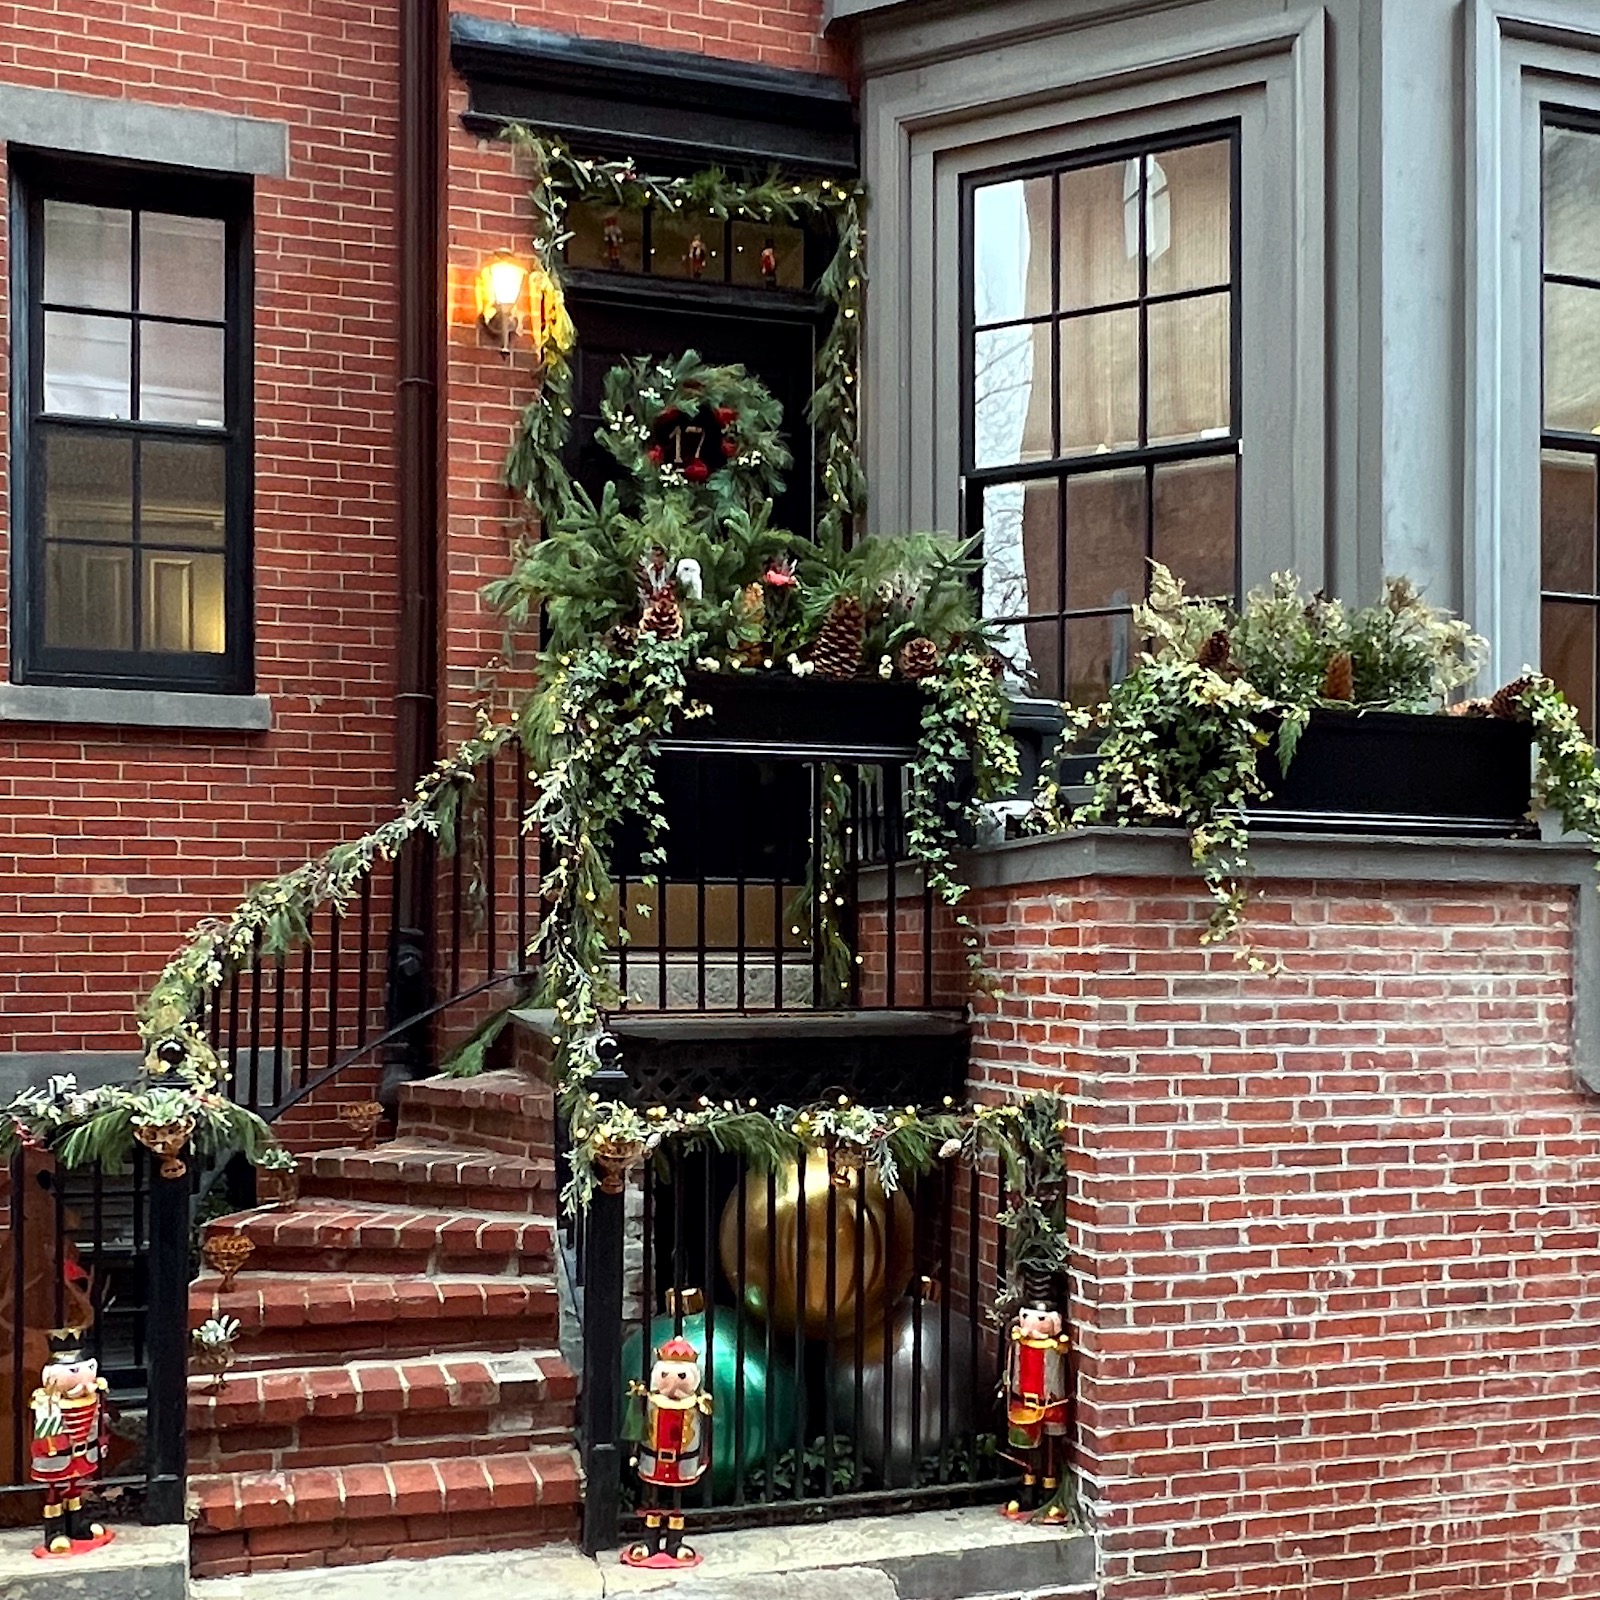 Holiday house tour Beacon Hill December 2022 Front door gorgeous Christmas decorations